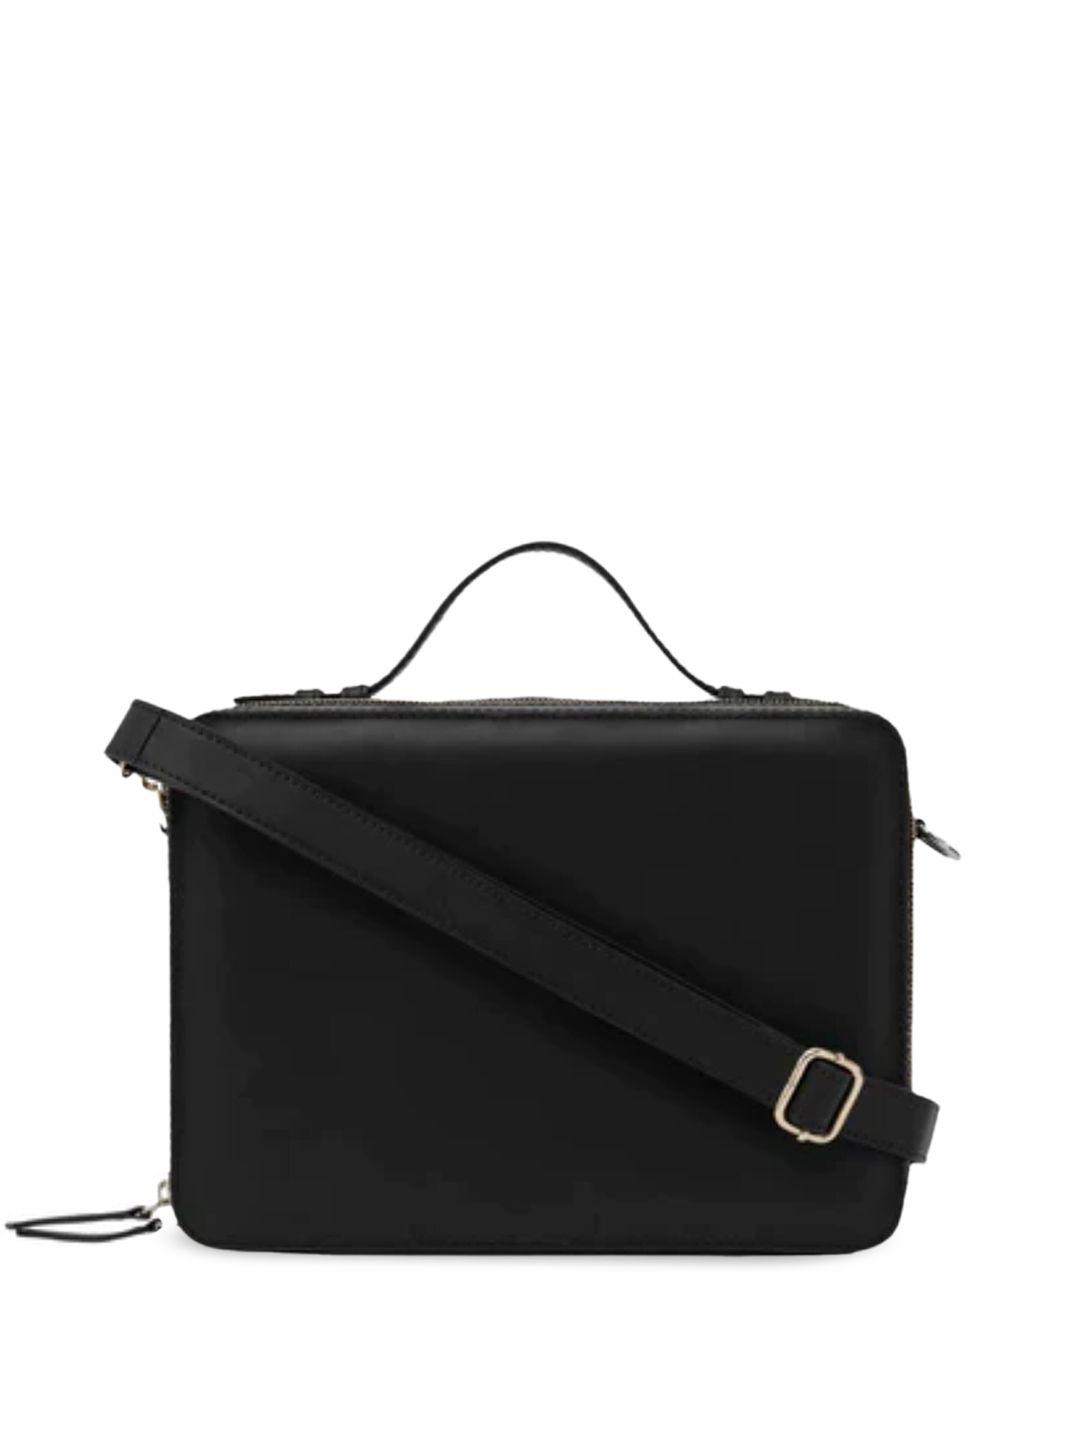 mistry textured leather structured satchel